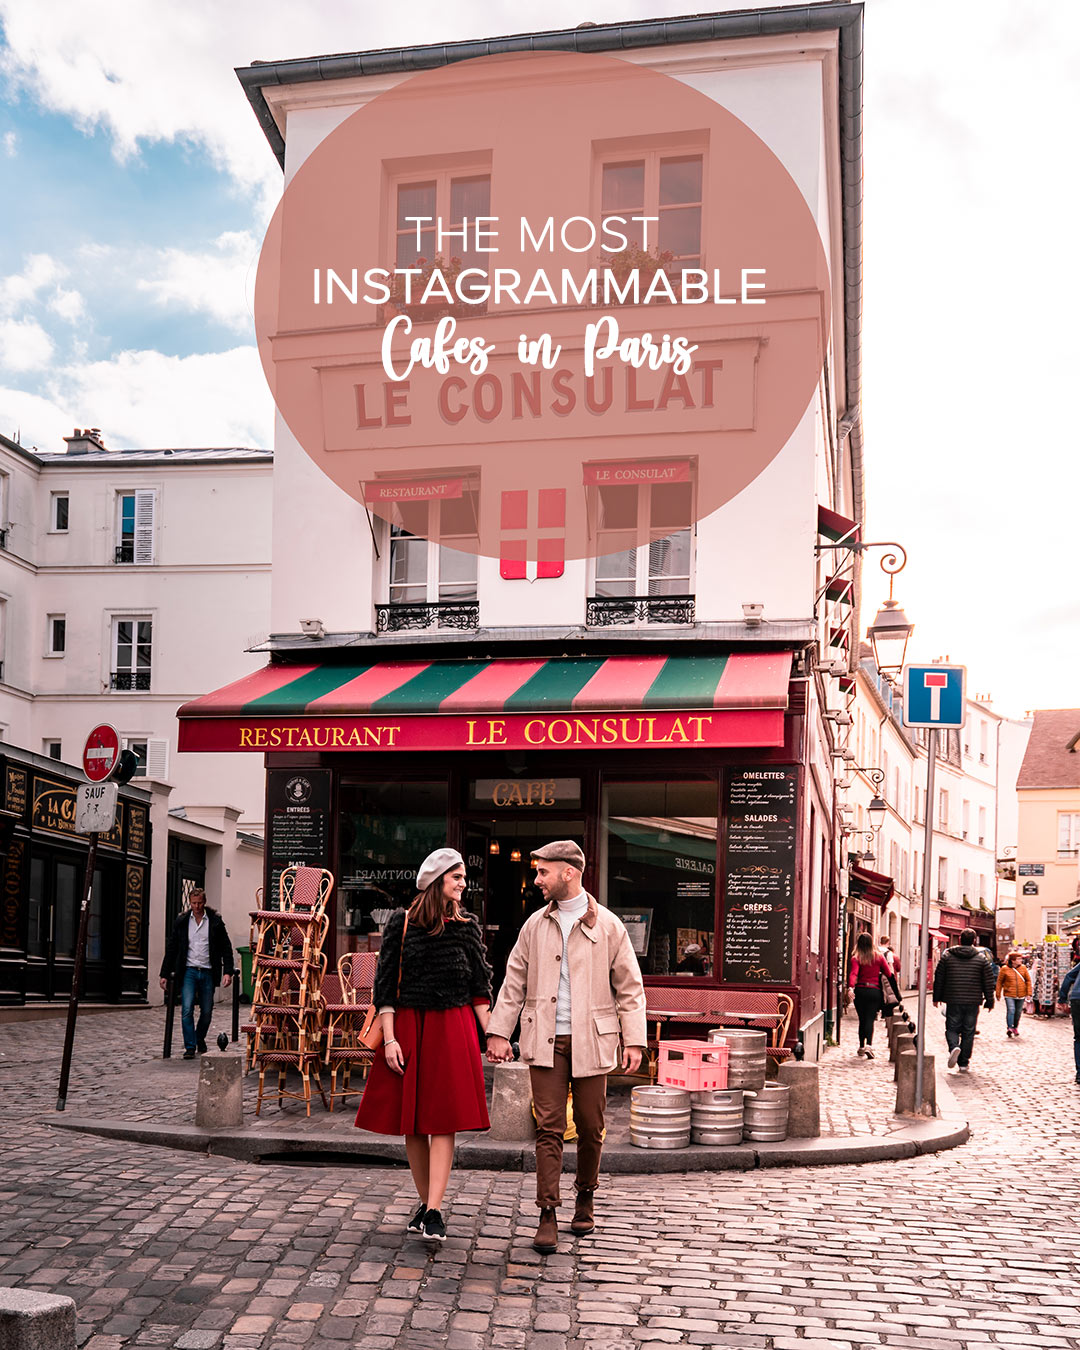 72 Most Instagrammable Places in Paris: A Photographer's Guide